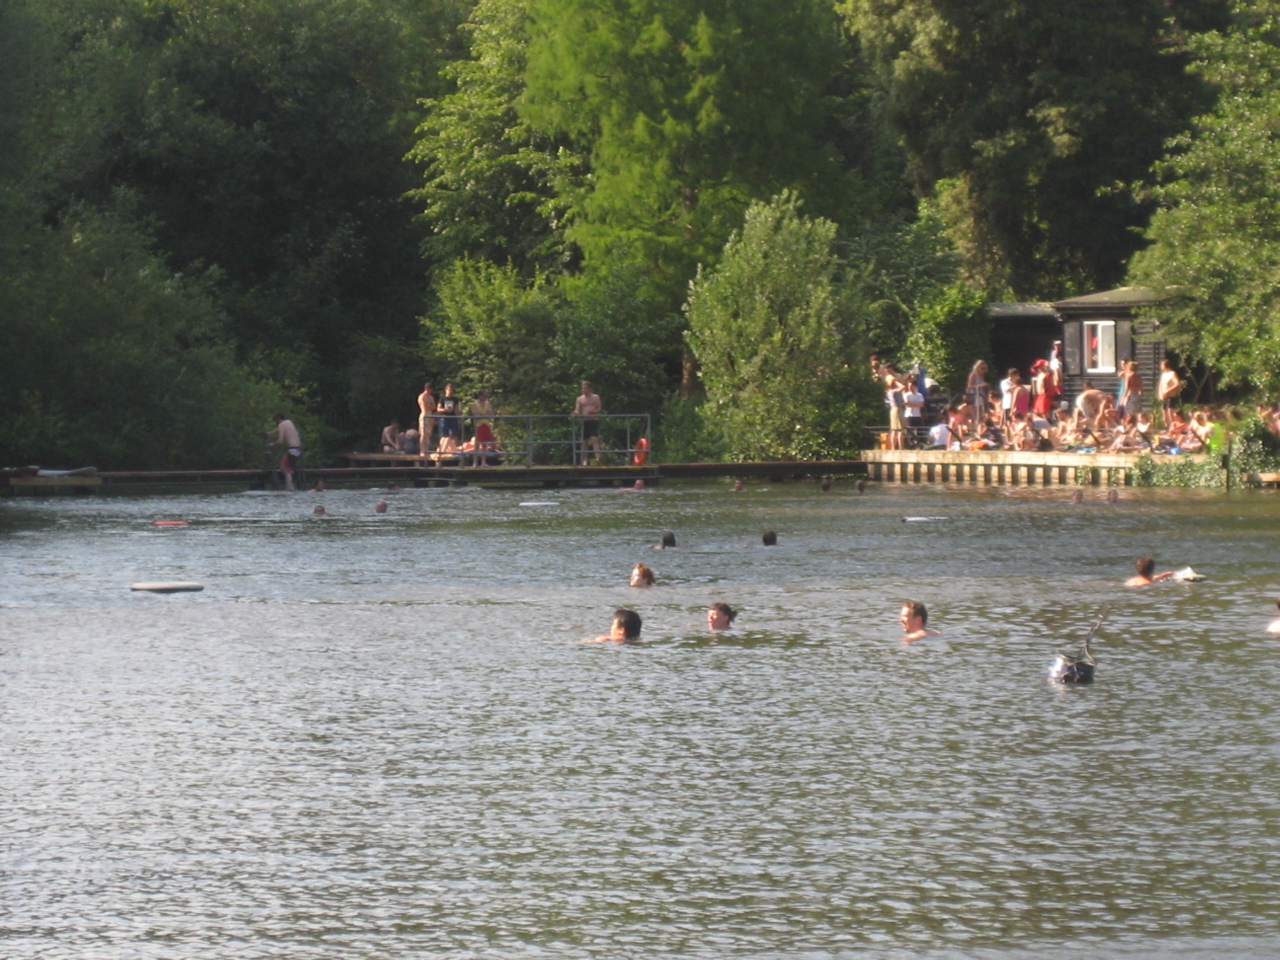 100 Great Things About London 18. Swimming with ducks in